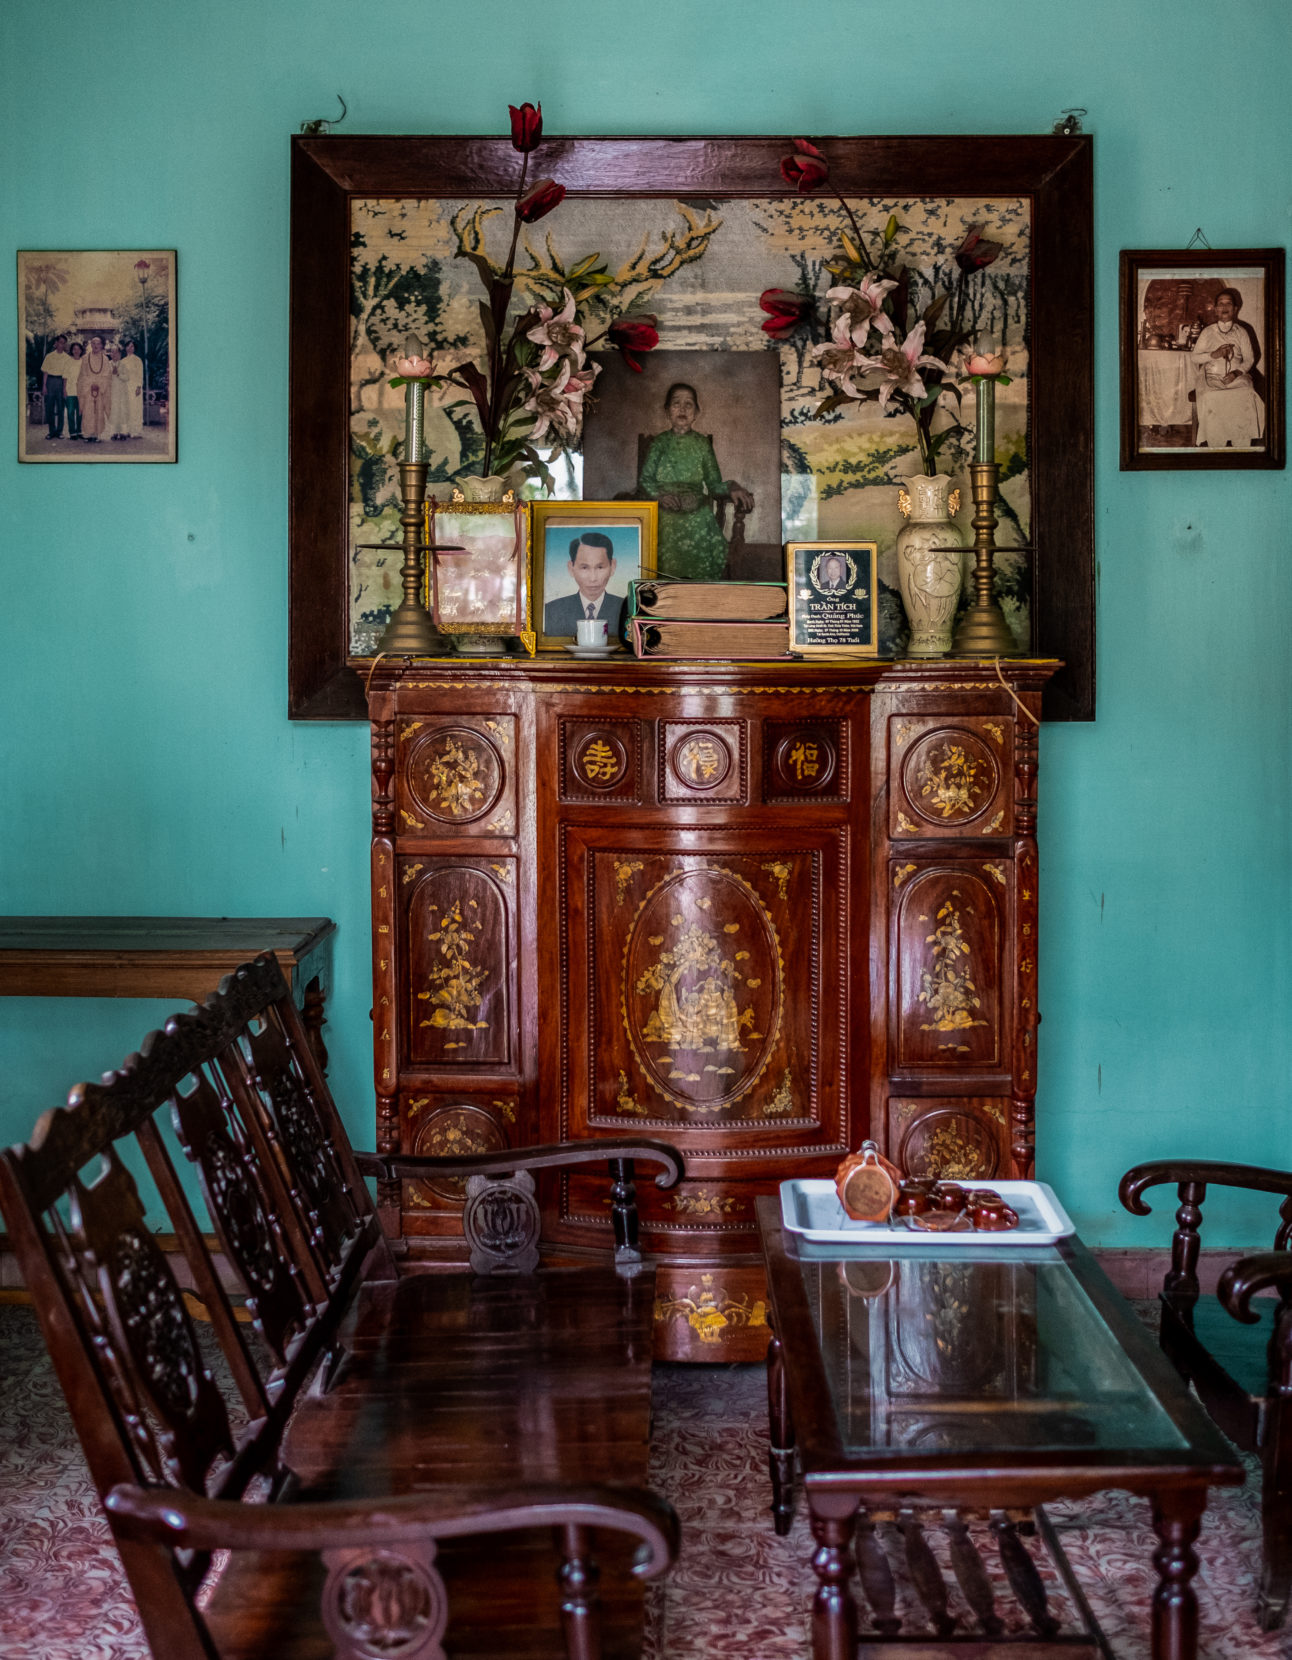 A portrait of the late Lê Thị Hoè takes pride of place inside the home she built in the early 1960s. Photo: Hiếu Trương Minh.